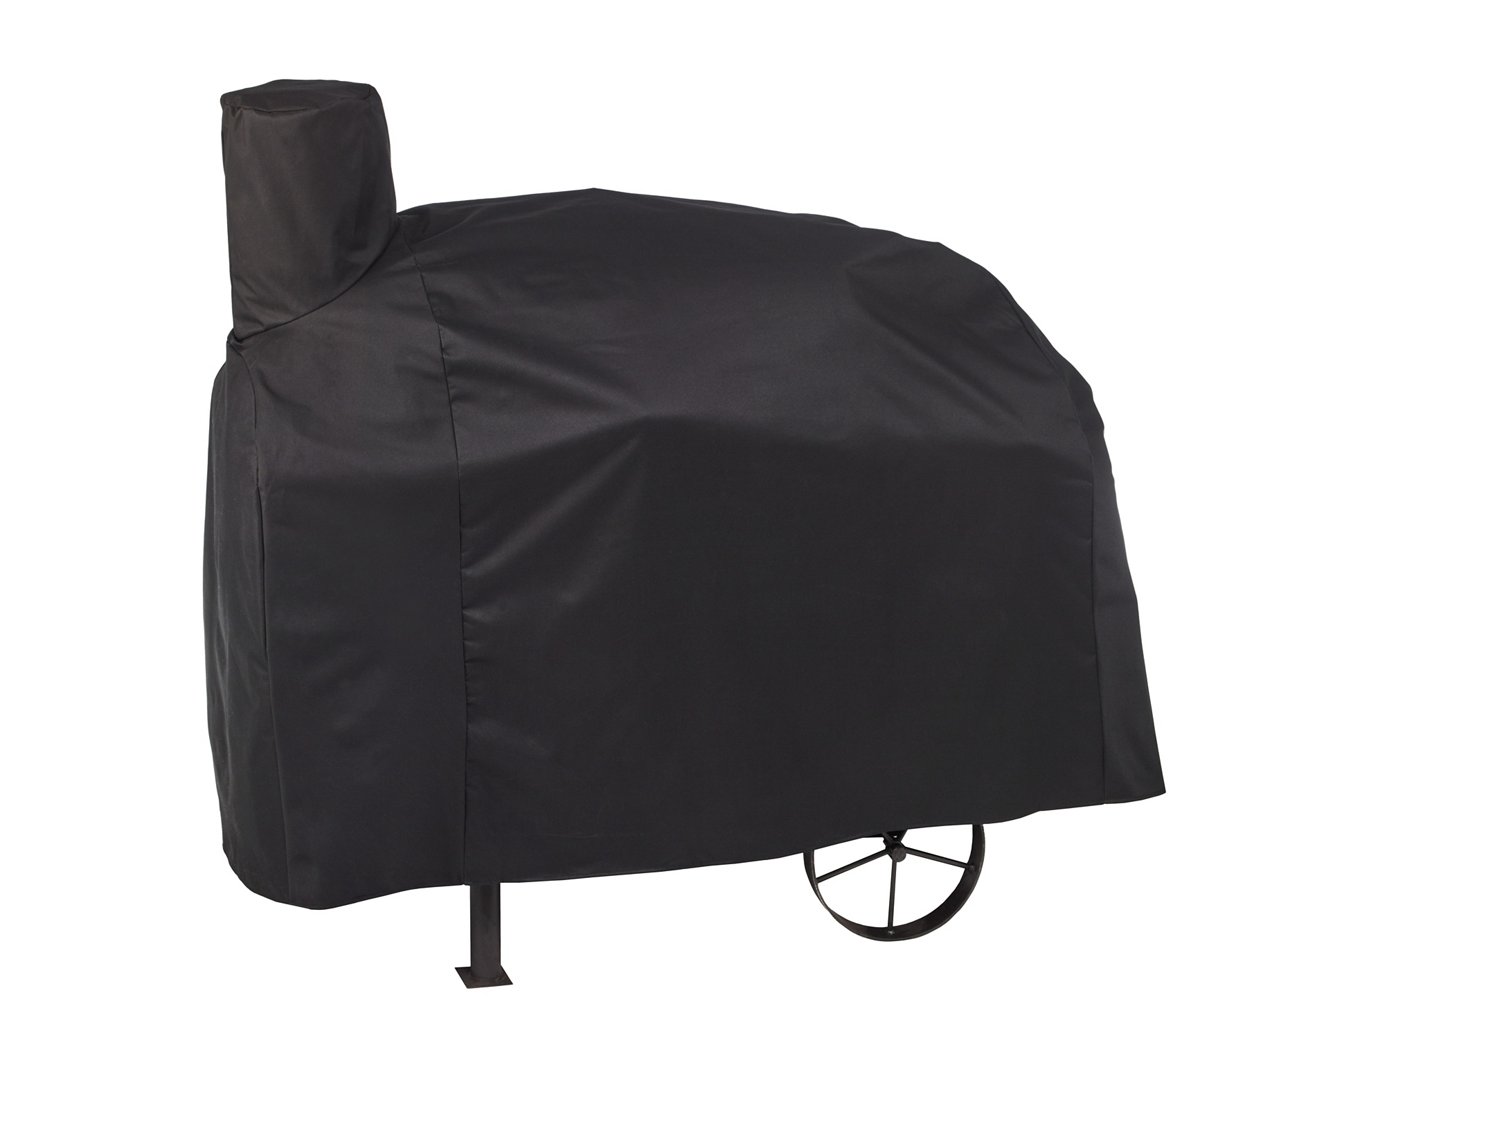 Old Country BBQ Pits Wrangler Smoker Cover | Academy